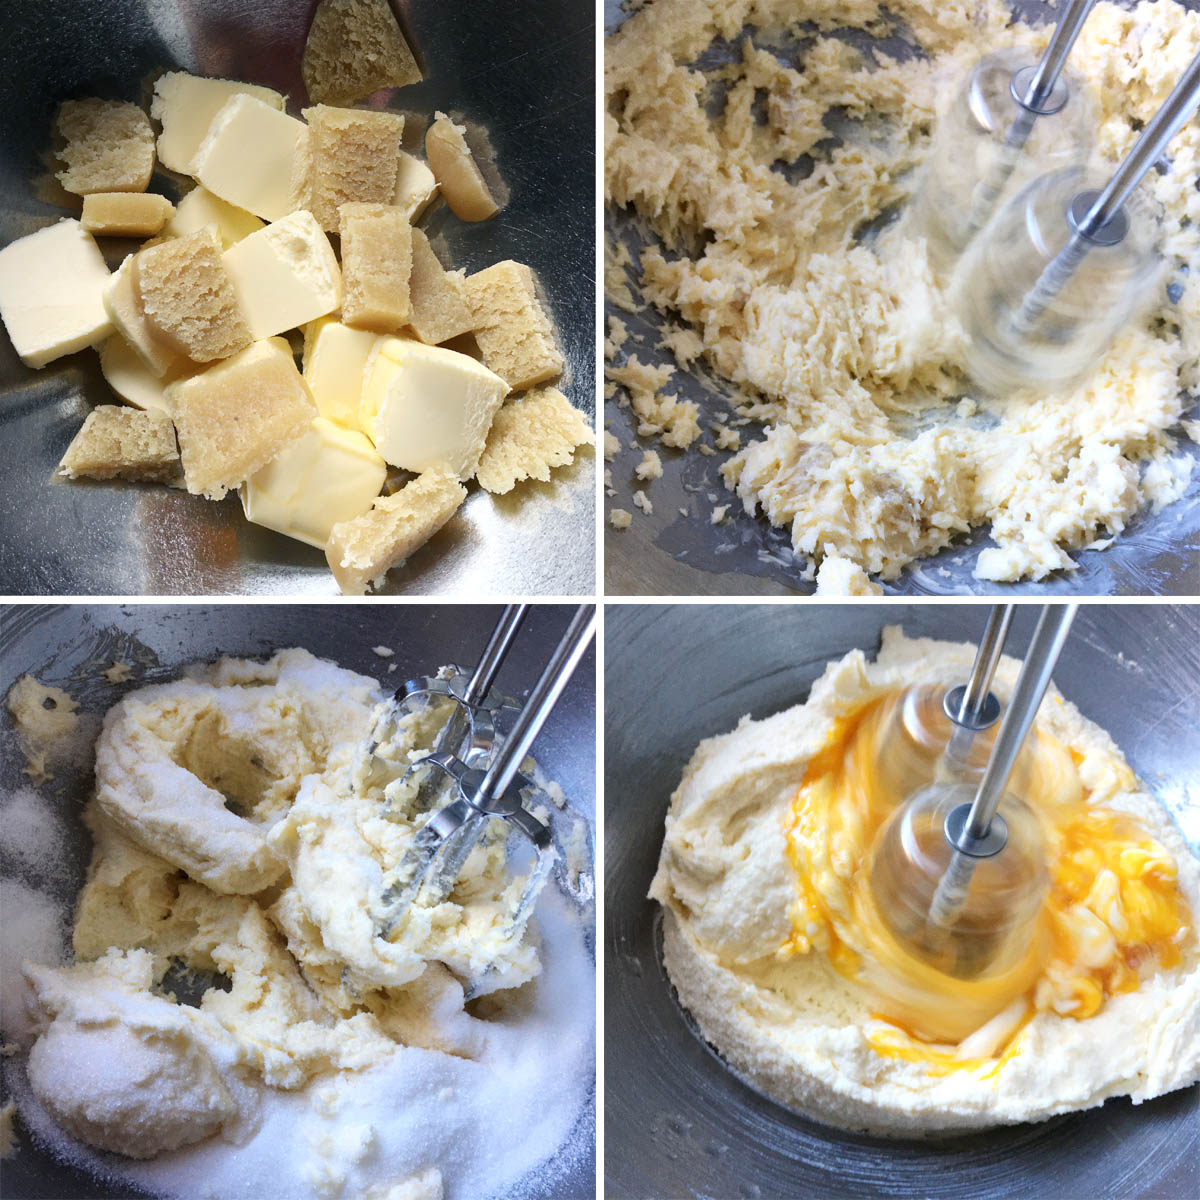 Metal mixer beaters mixing together butter with white sugar and yellow eggs.